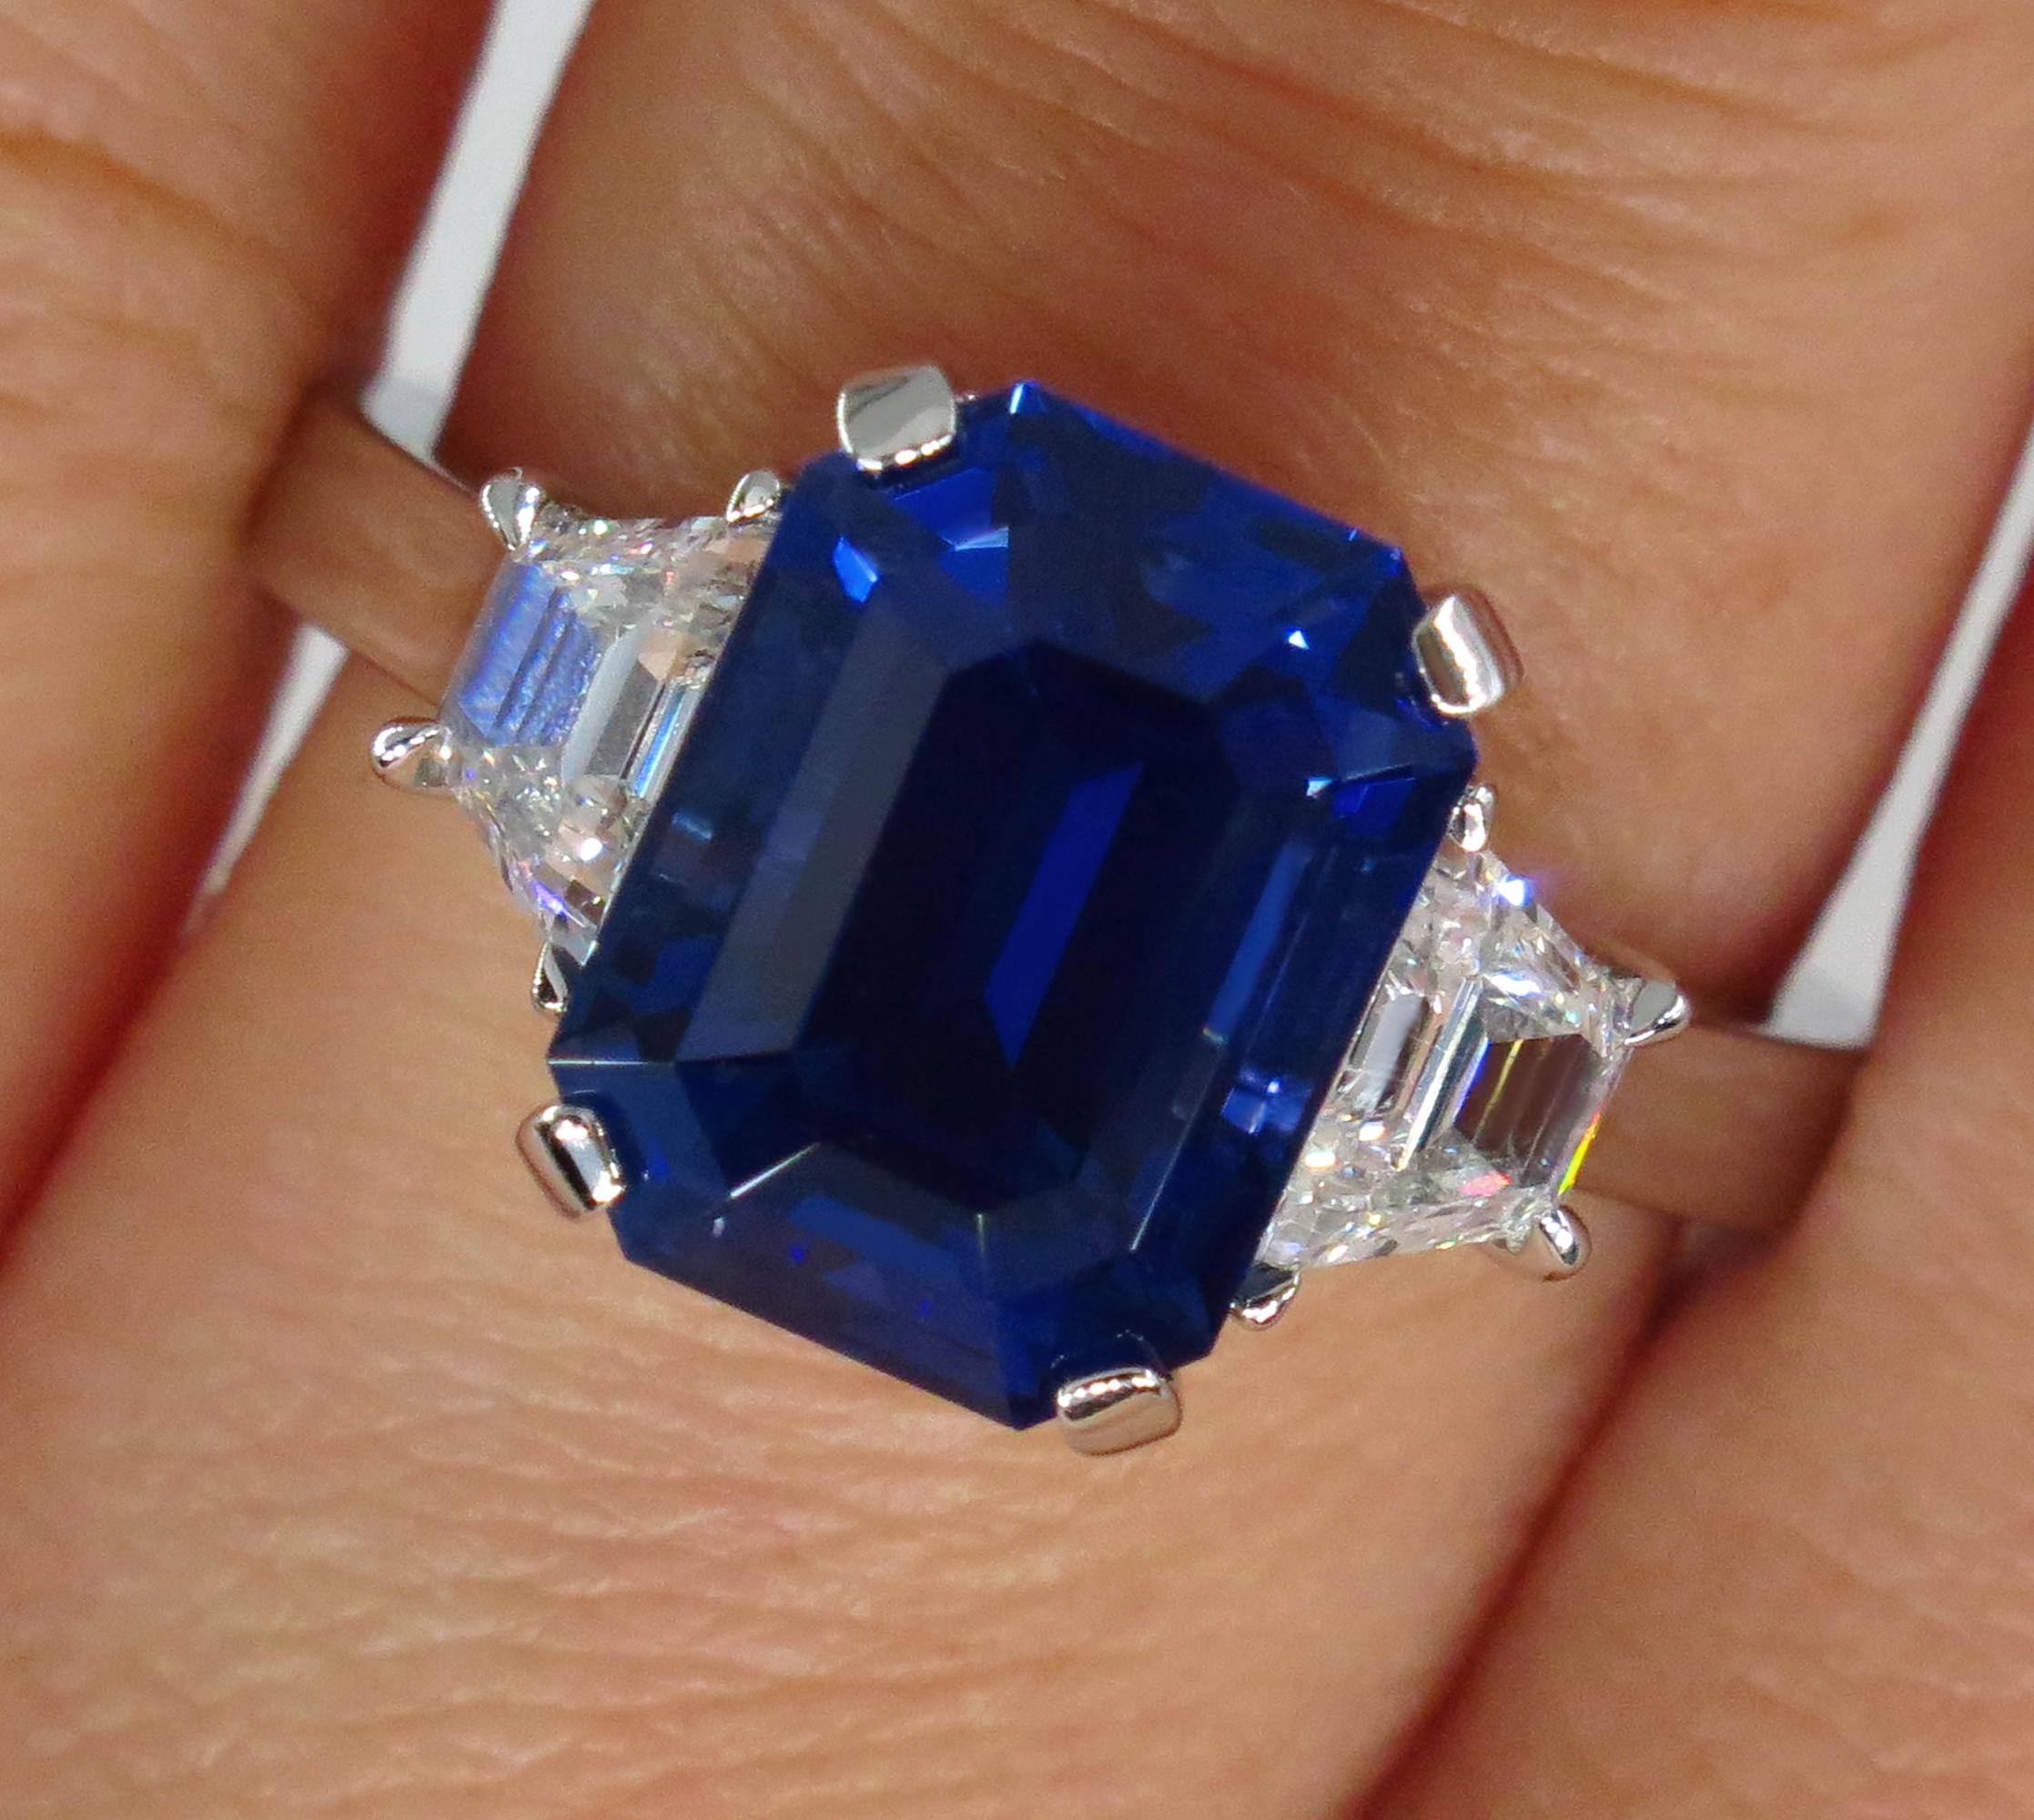 Iconic Style and VERY ELEGANT Ceylon Natural Gorgeous Deep Blue Sapphire & Diamond Trilogy Ring.

A SUPER fine Estate Ring features a Gorgeous gem : 4.16 carat Natural CEYLON Emerald Cut Deep Blue SAPPHIRE, measuring 9.97x7.51x5.88mm, bearing a